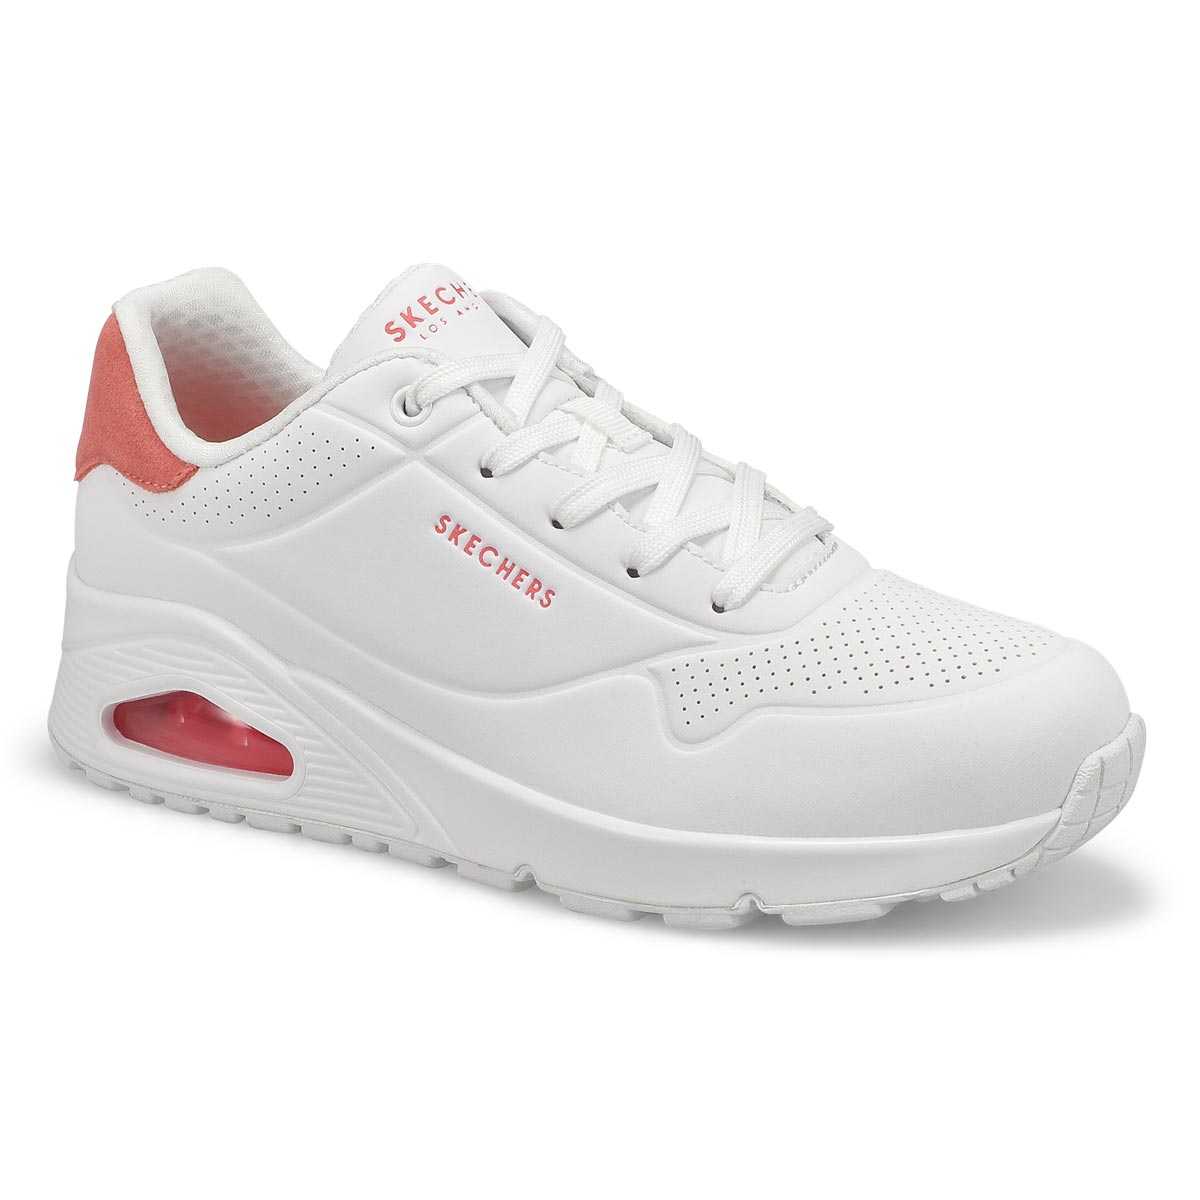 Womens  Uno Pop Back Lace Up Sneaker - White/Coral